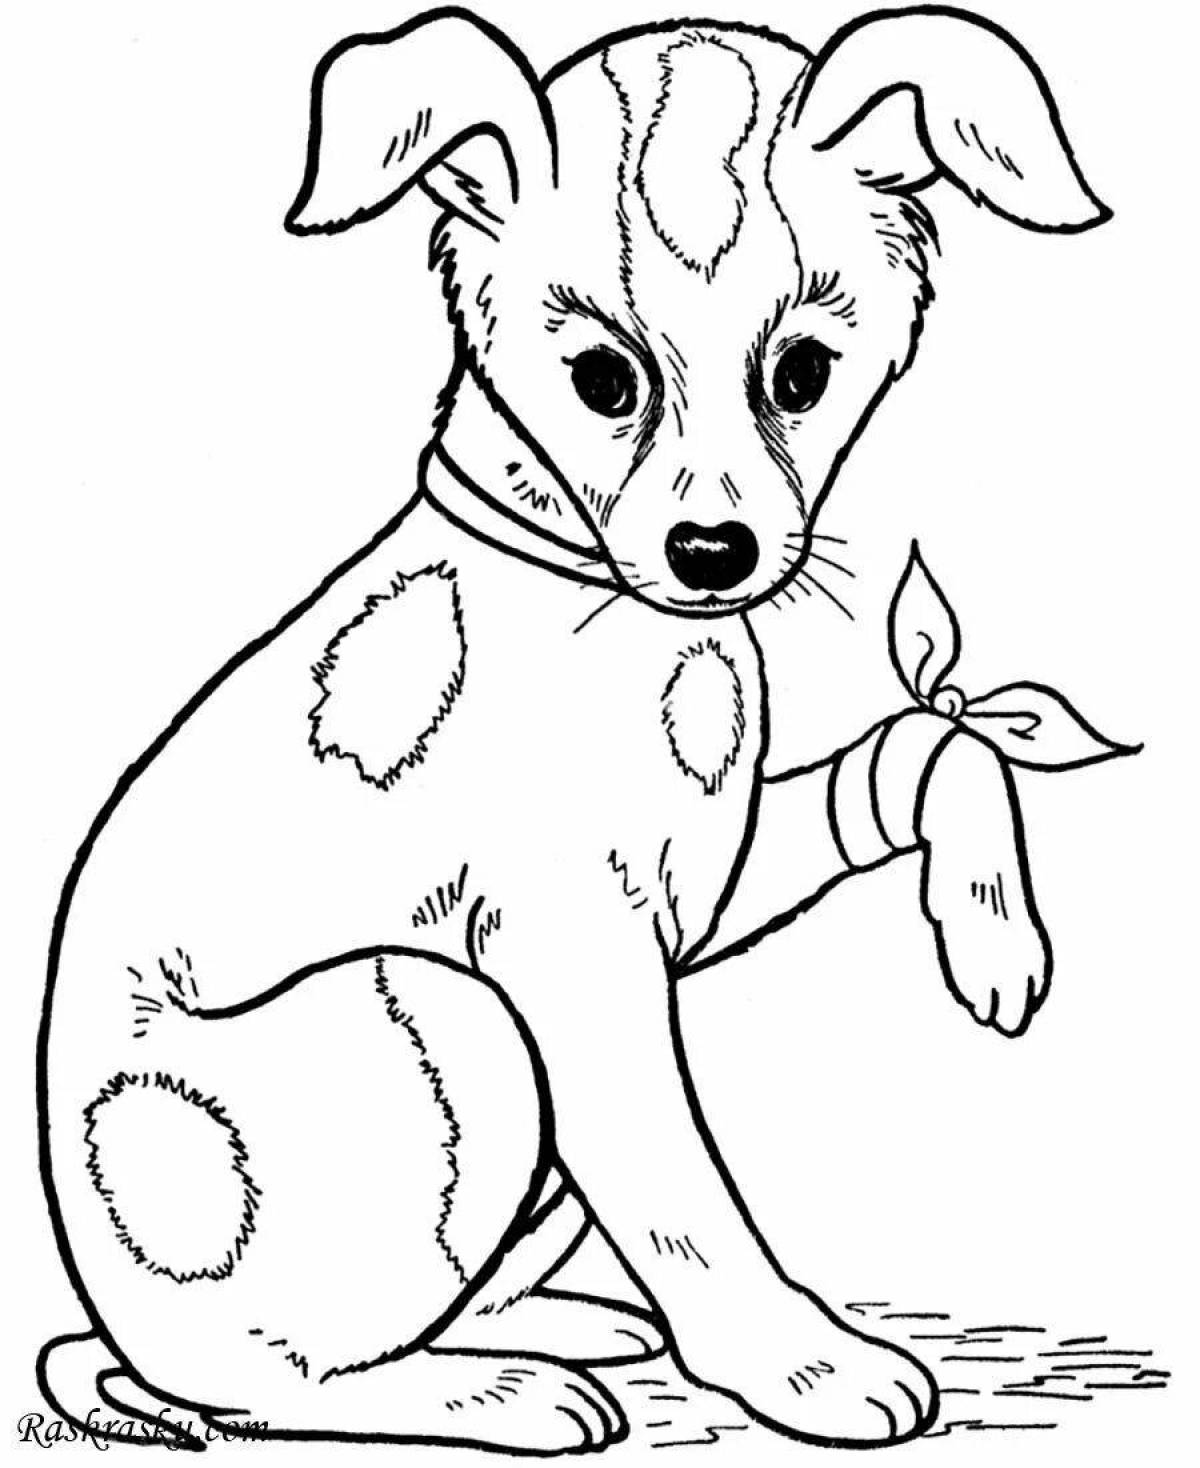 A fascinating dog coloring book for children 7-8 years old